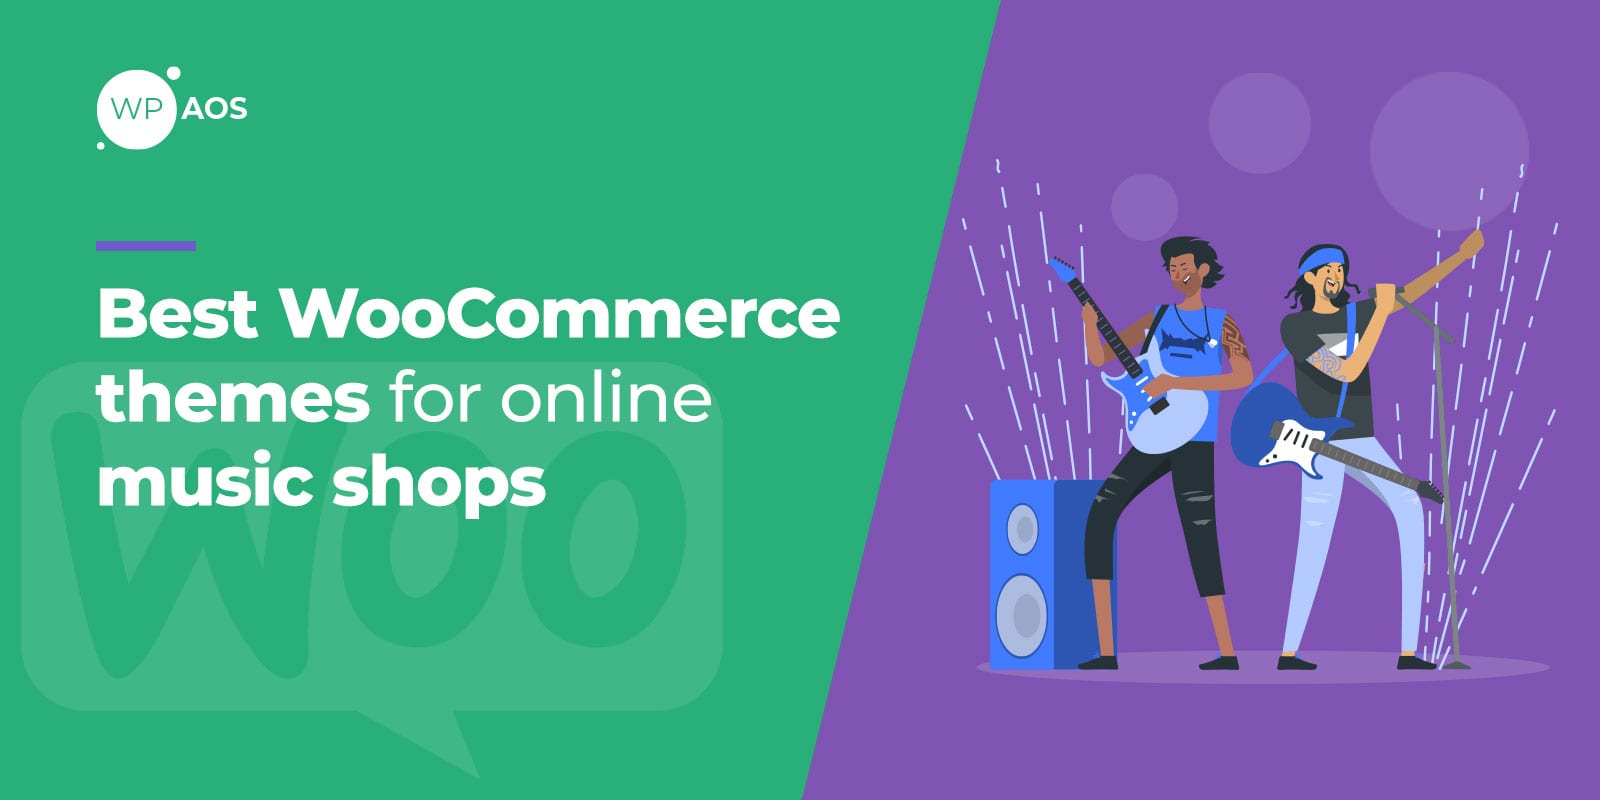 Best WooCommerce Themes for Online Music Shops, wpaos